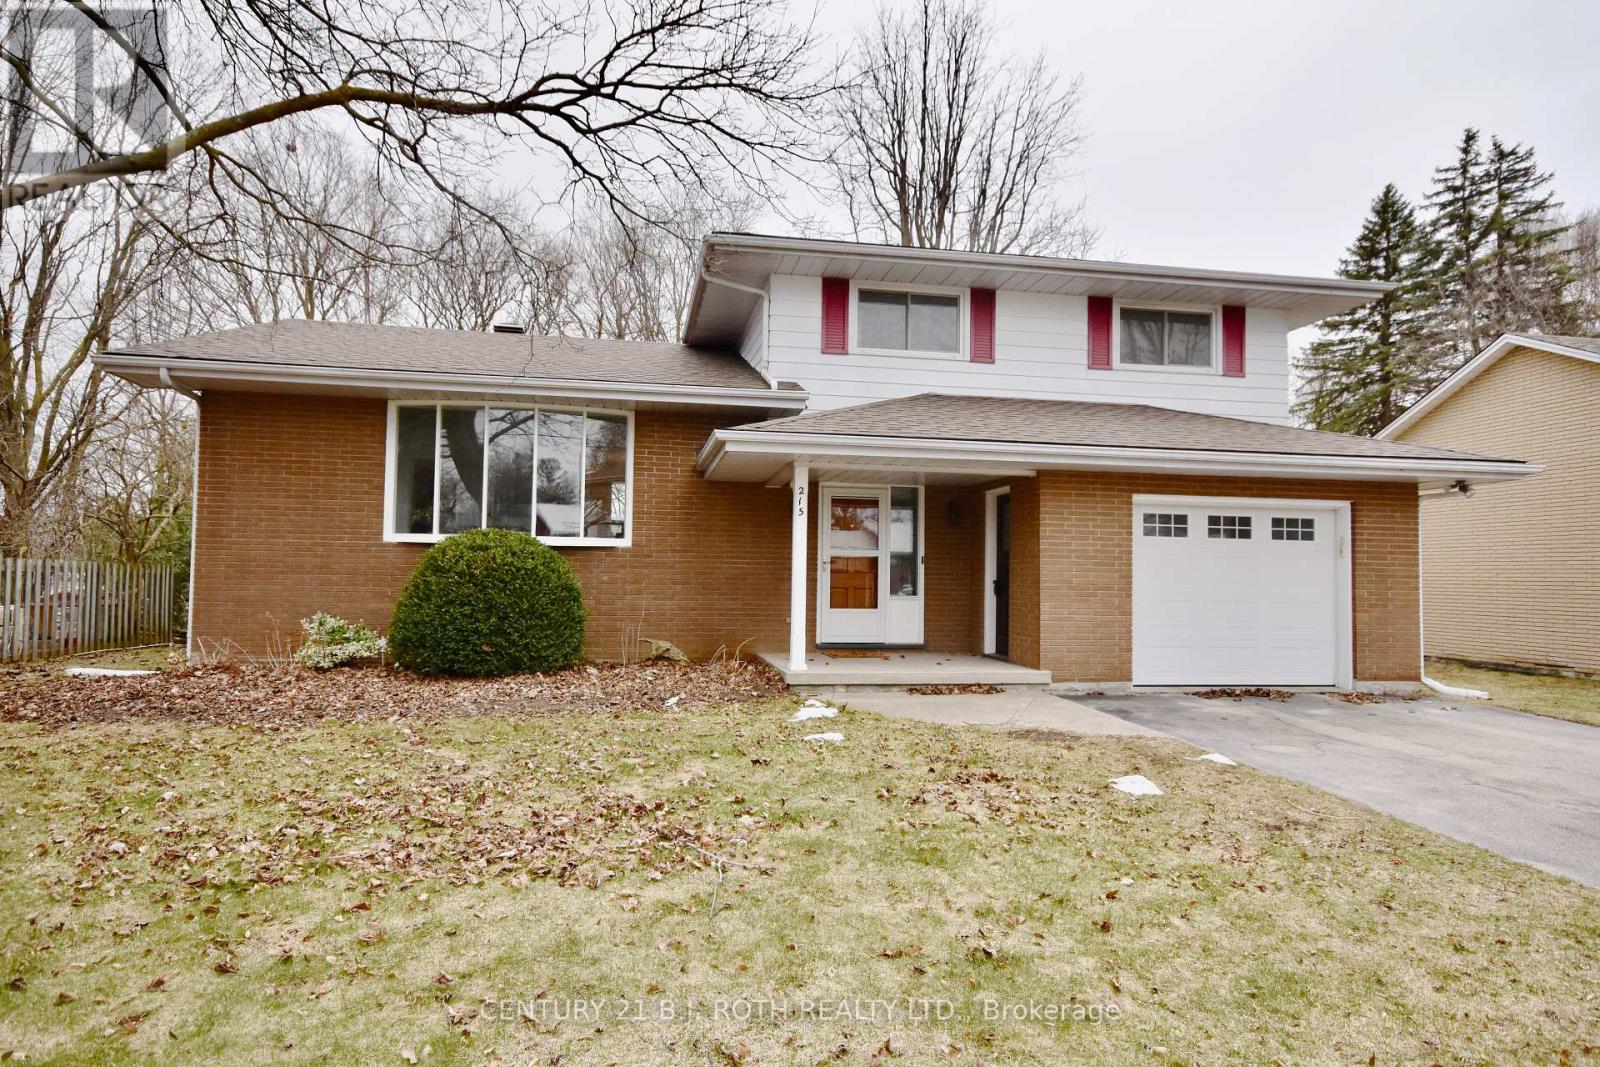 215 Hamilton Drive, Clearview, 3 Bedrooms Bedrooms, ,2 BathroomsBathrooms,Single Family,For Sale,Hamilton,S8179172